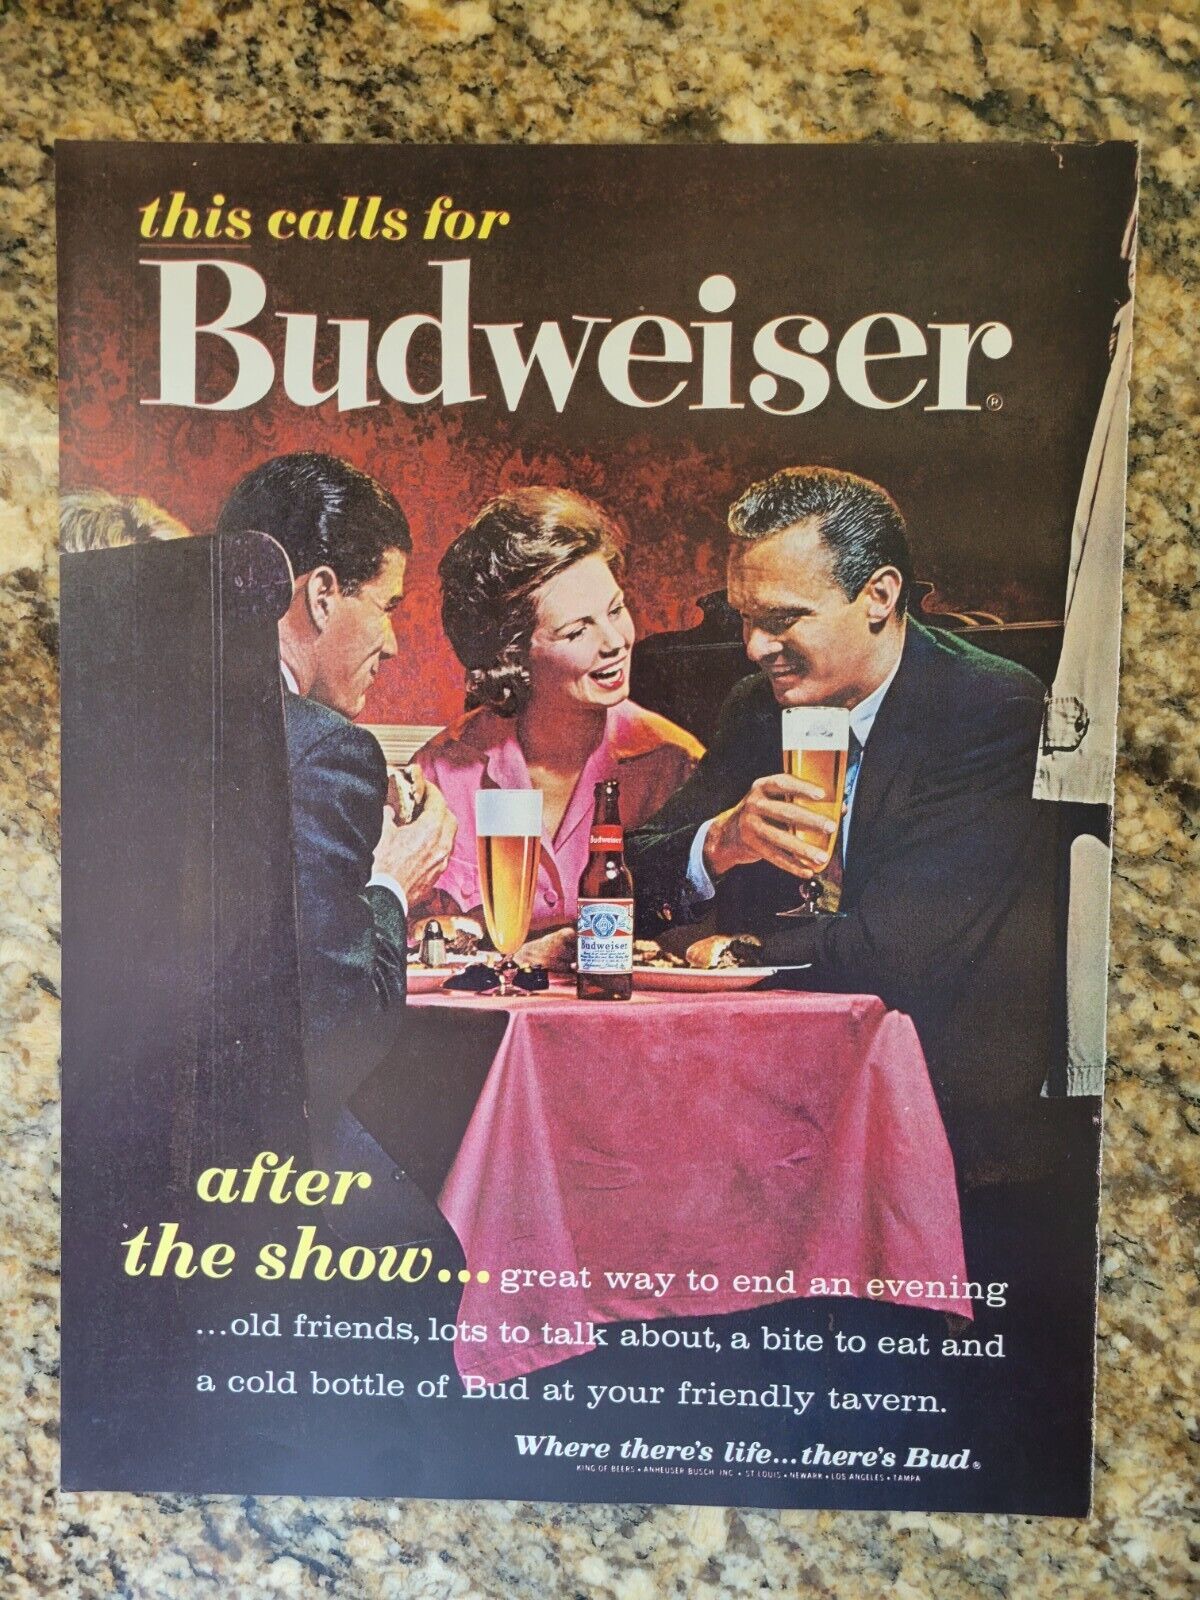 Vintage Budweiser Beer Ad This Calls For Budweiser After The Show...great Way To